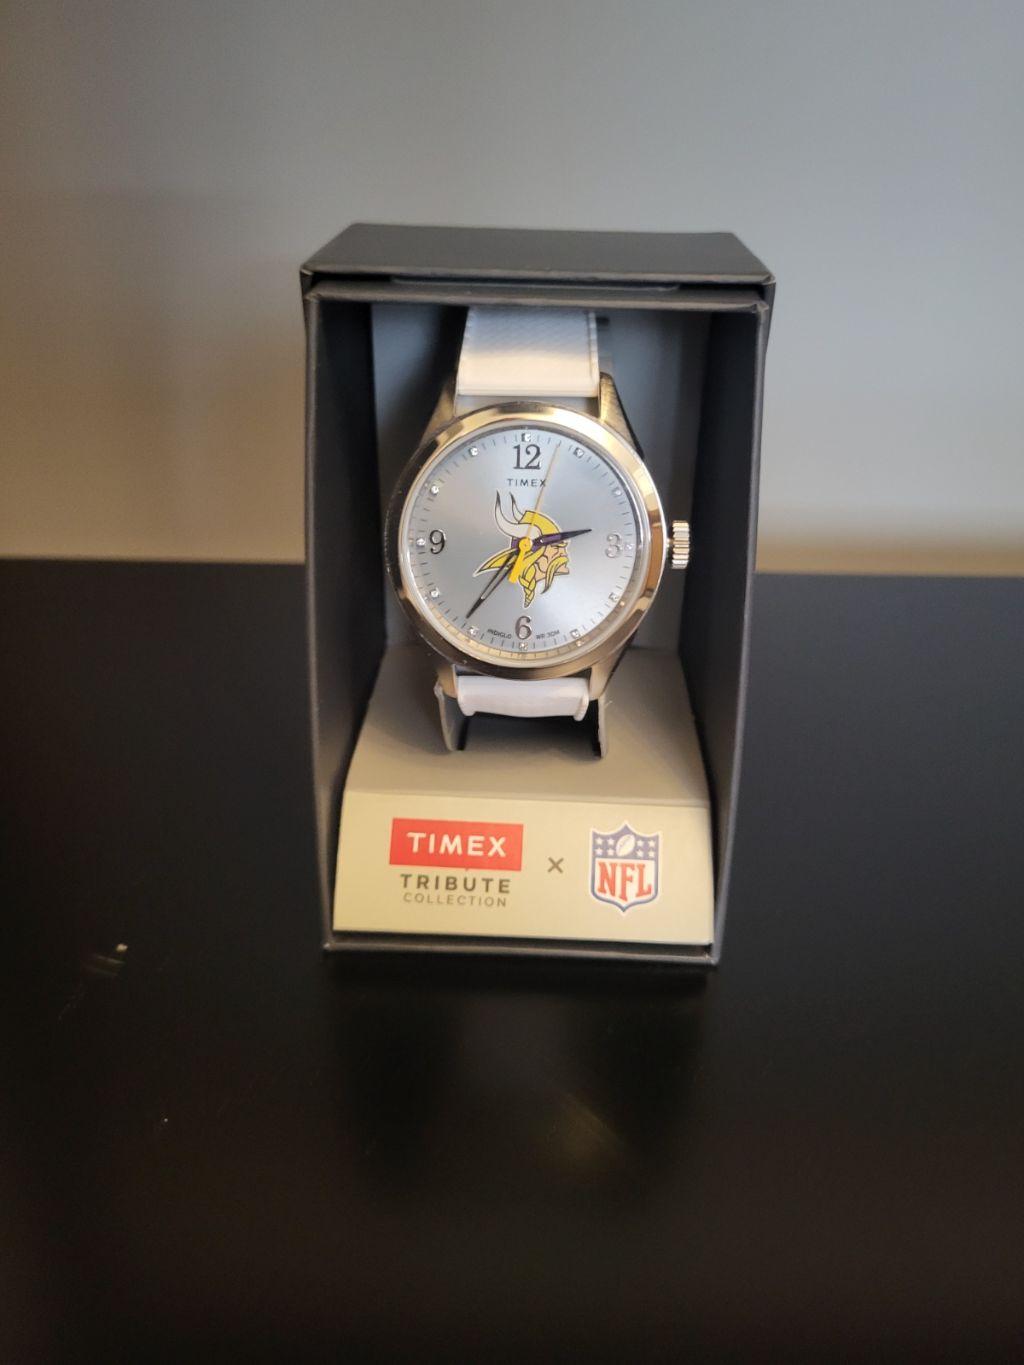 MN Vikings Watch - Timex Tribute Collection